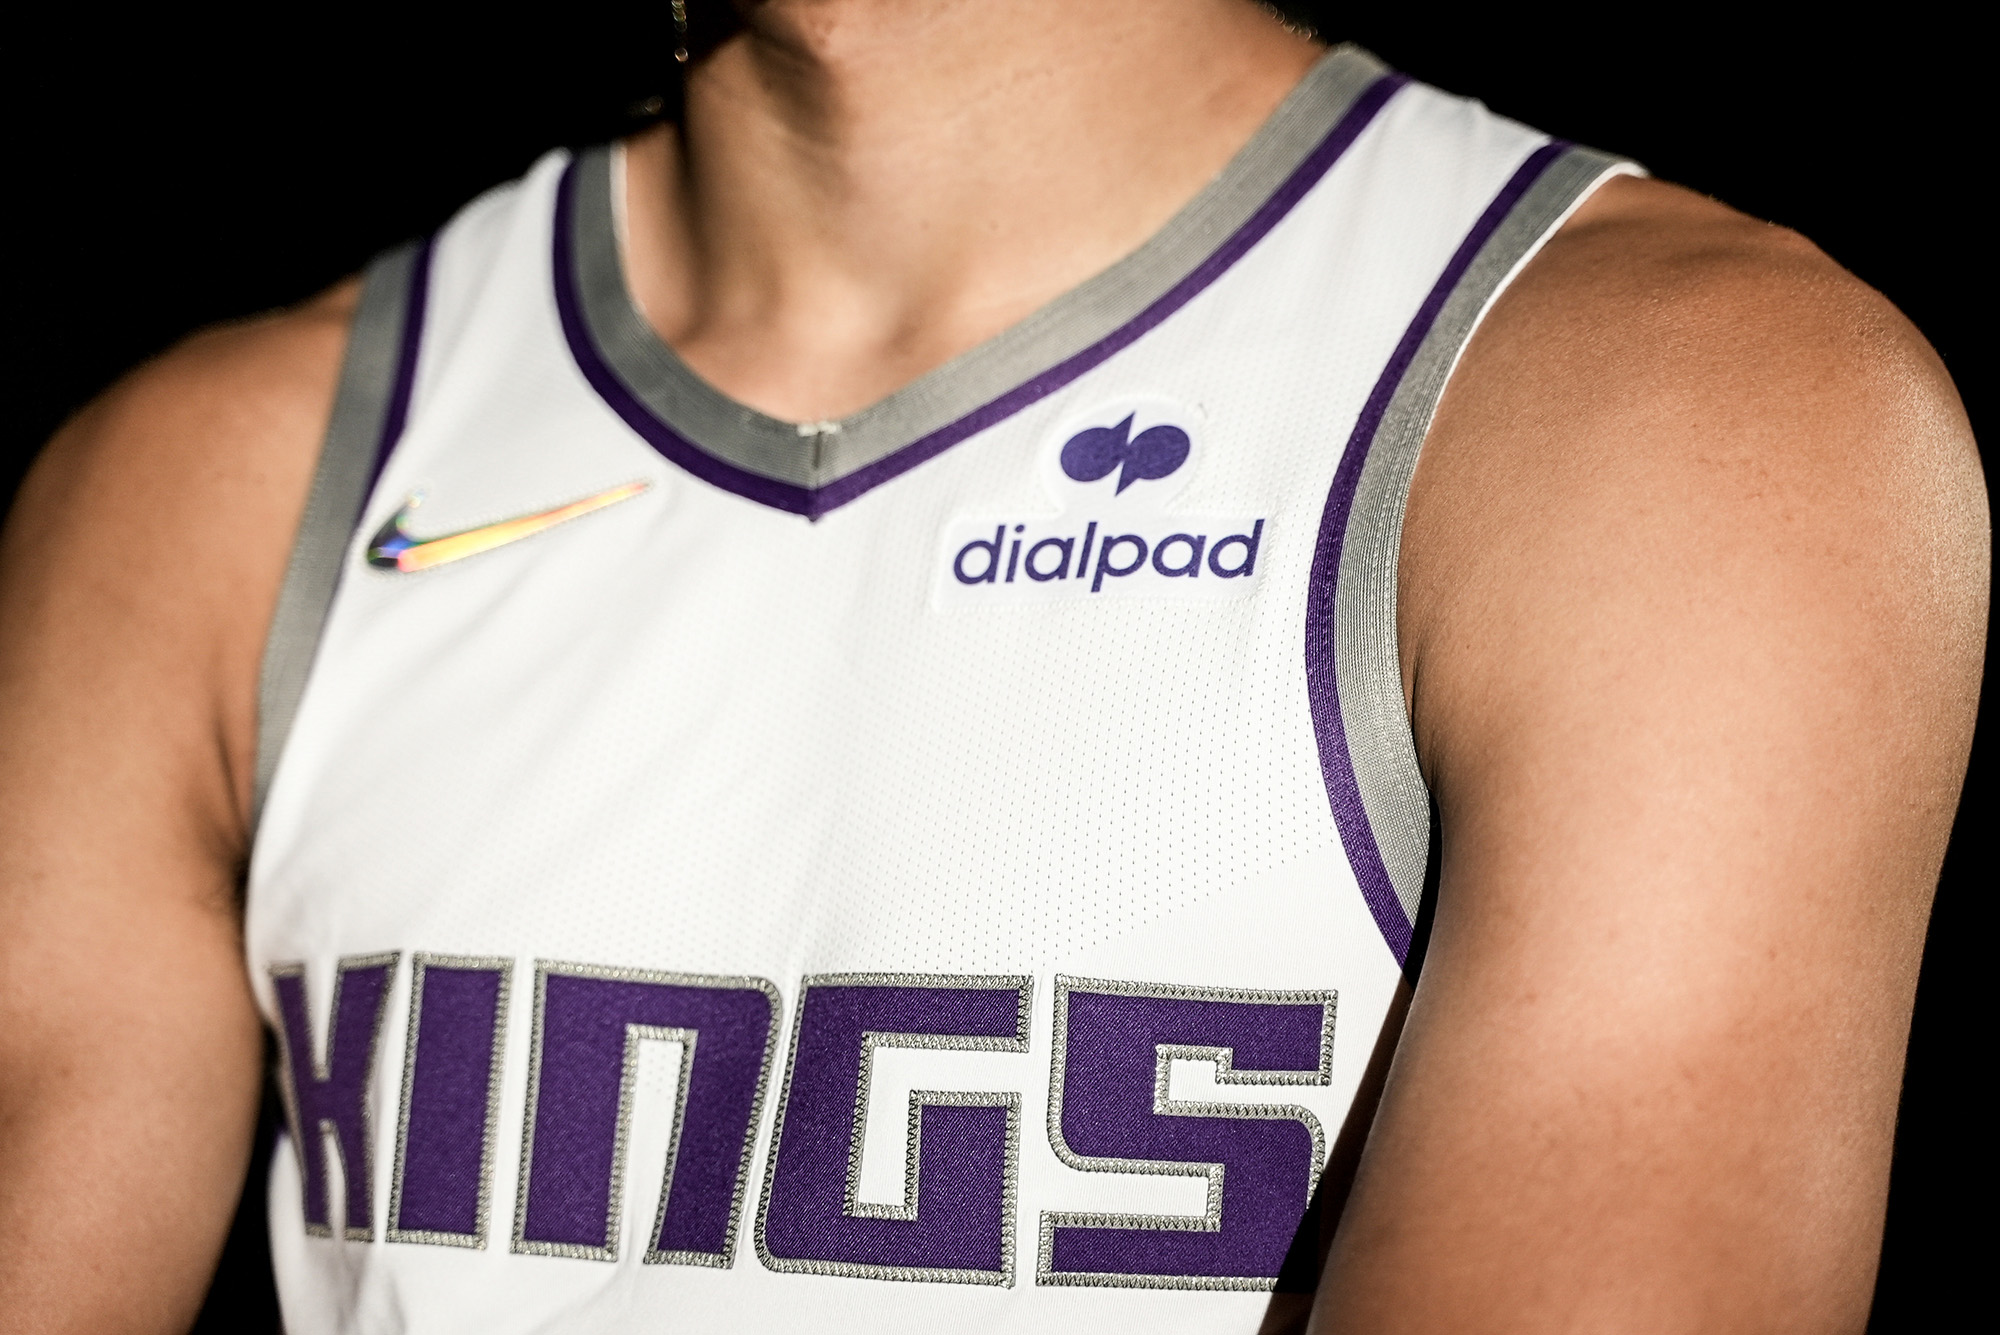 Here's a closer look at the new Sacramento Kings jersey 